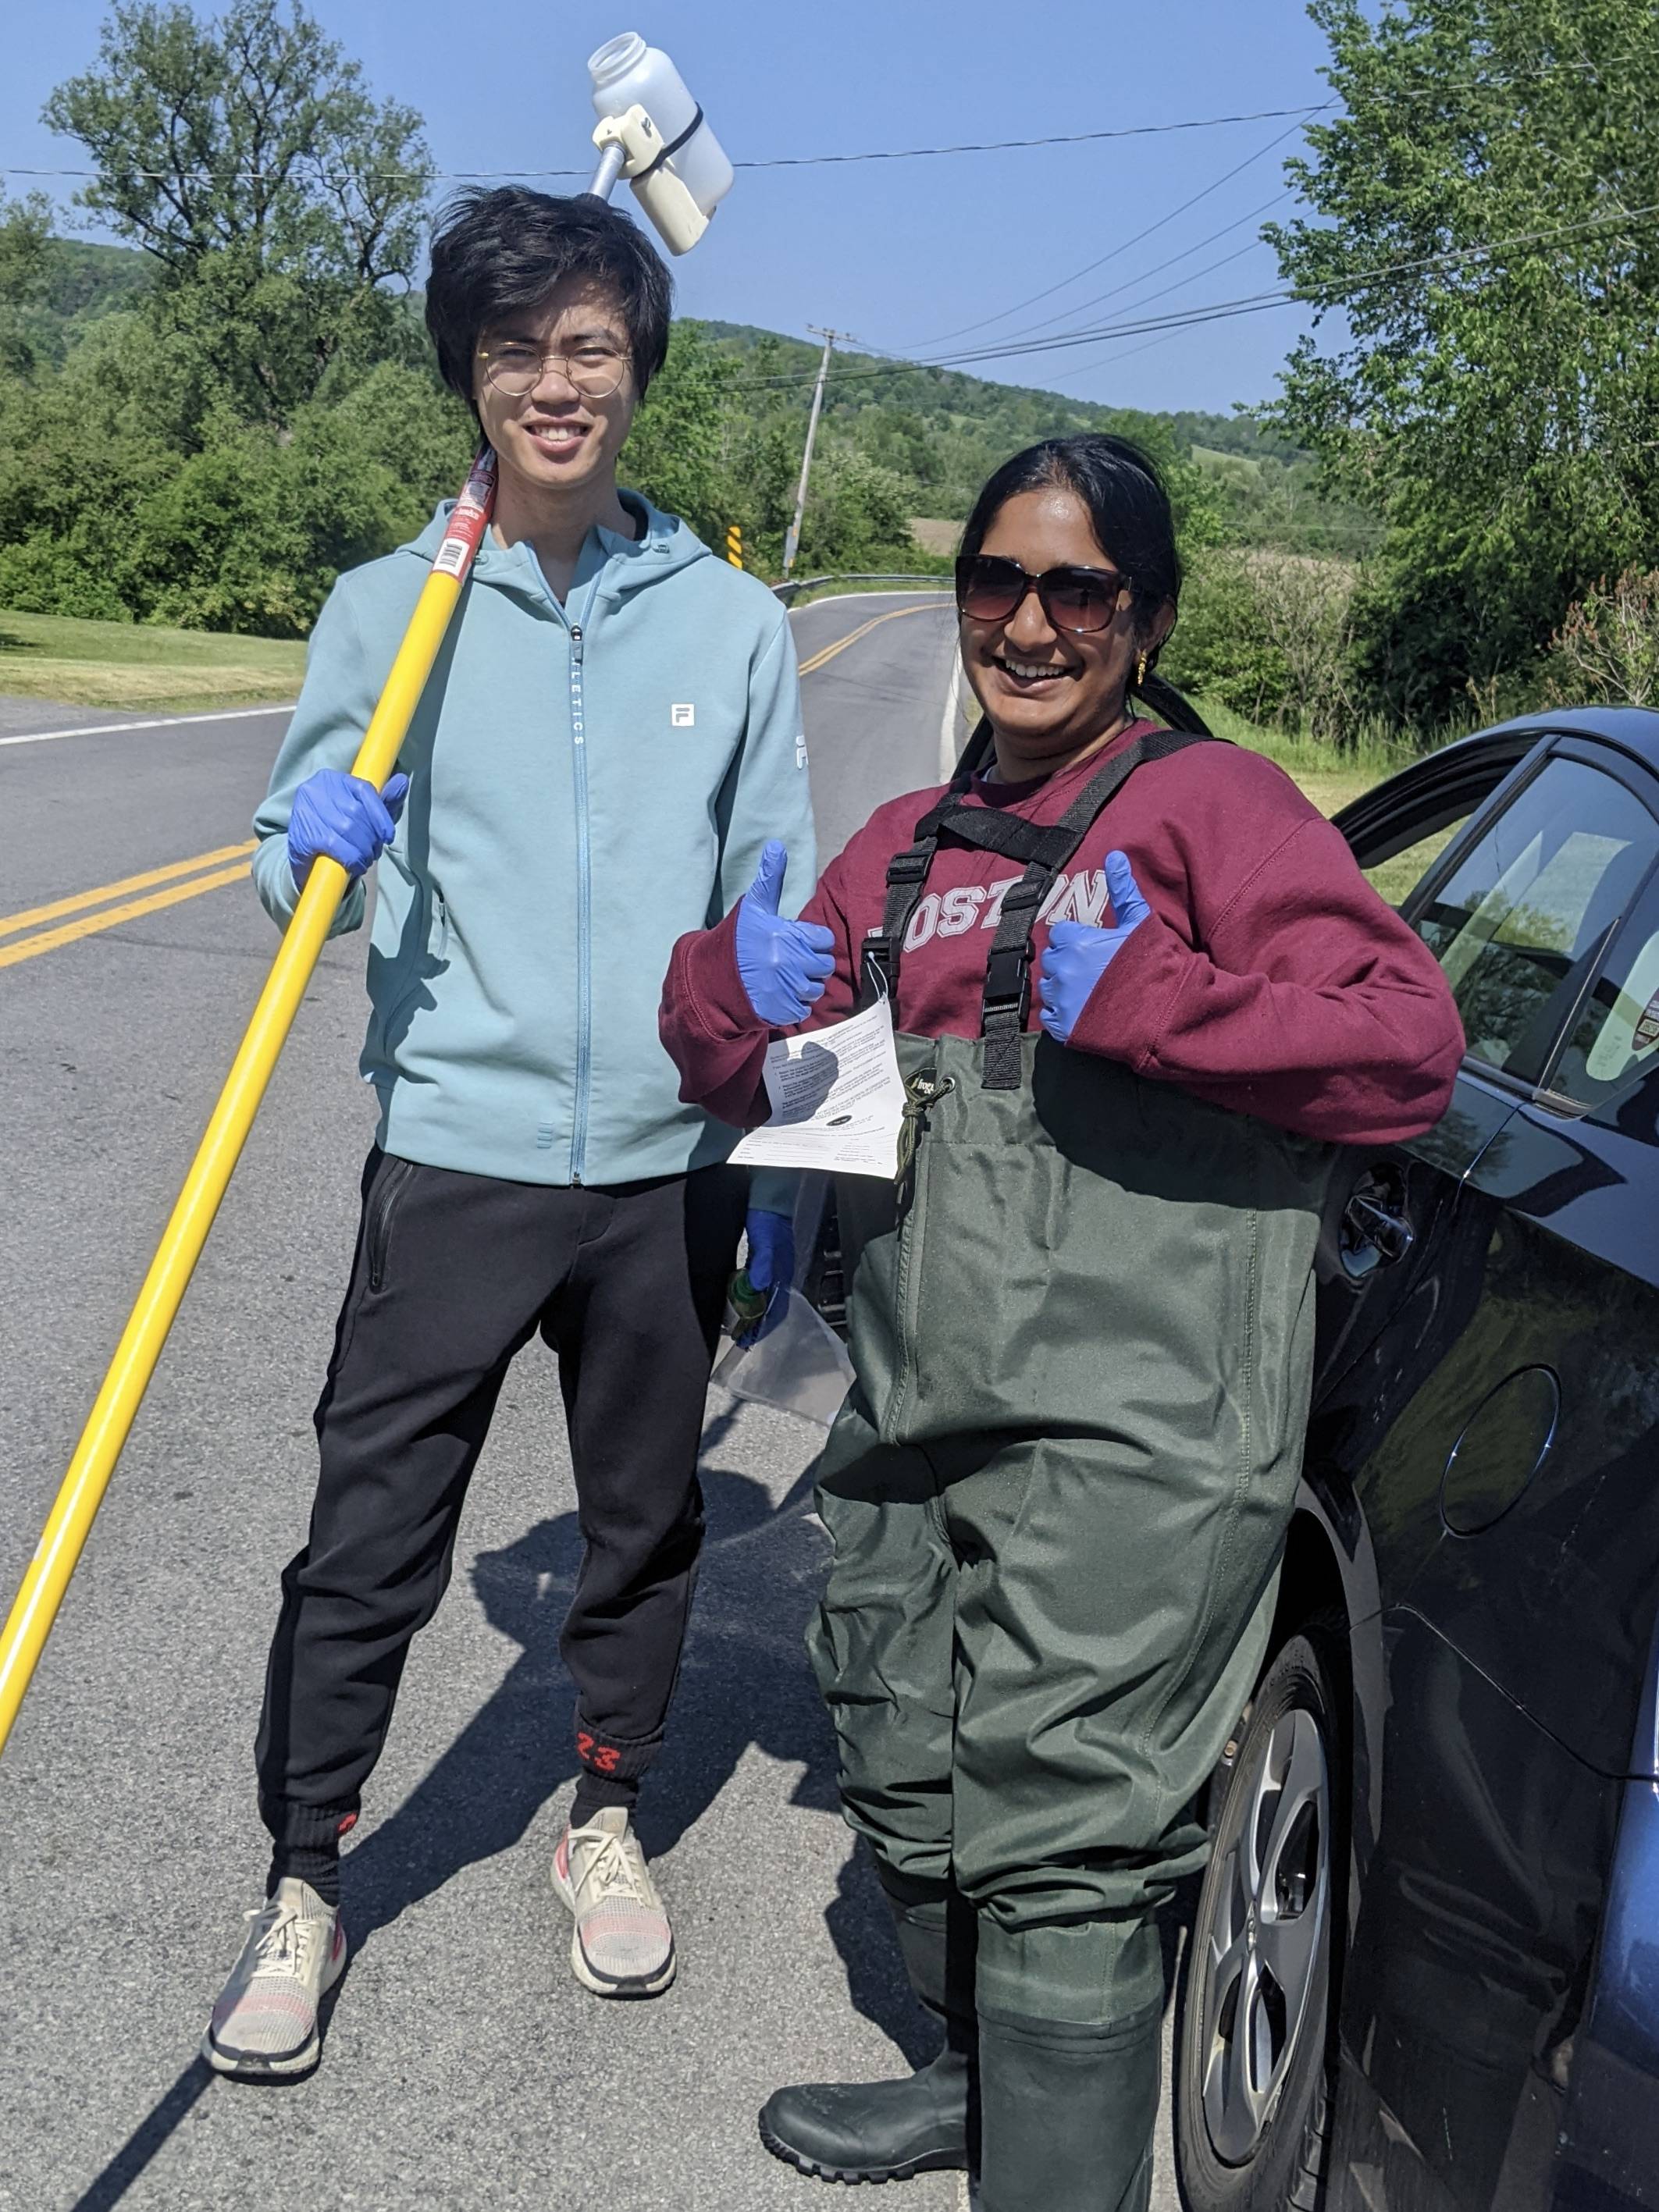 First day of fieldwork! Professor Tseng, Francesco, and I were at our downstream sampling site with waders to collect water samples. We used the waders at the downstream site because the waterway was harder to access.